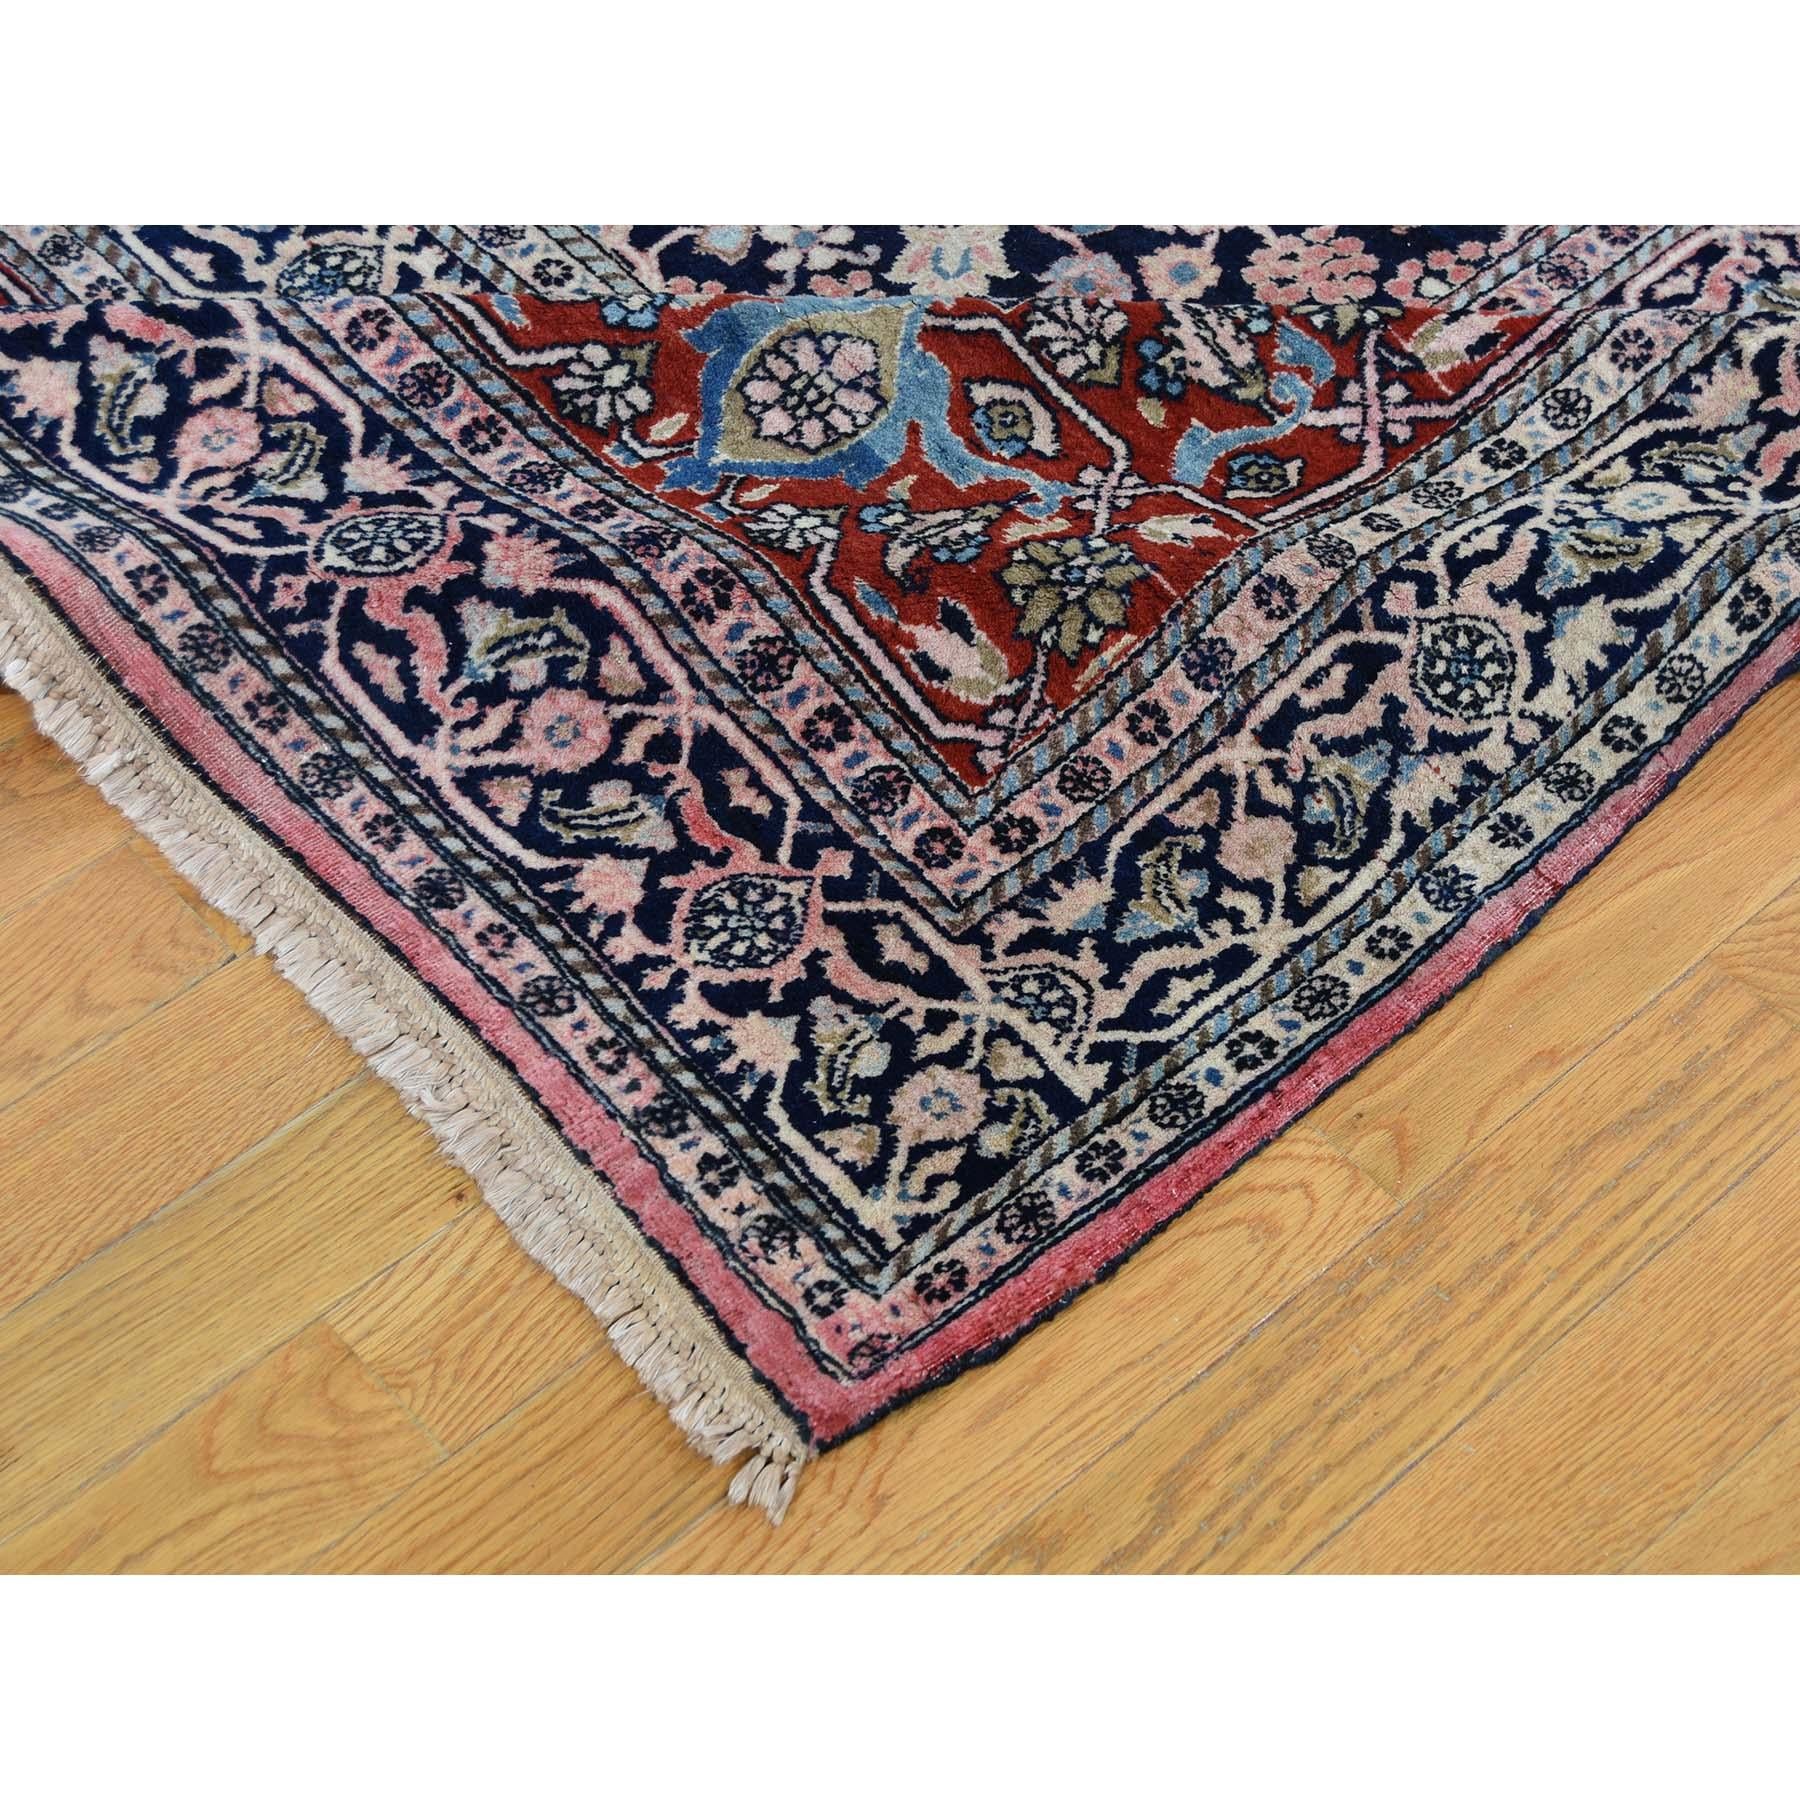 Antique Persian Bijar Good Condition Pure Wool Hand Knotted Oriental Rug 1